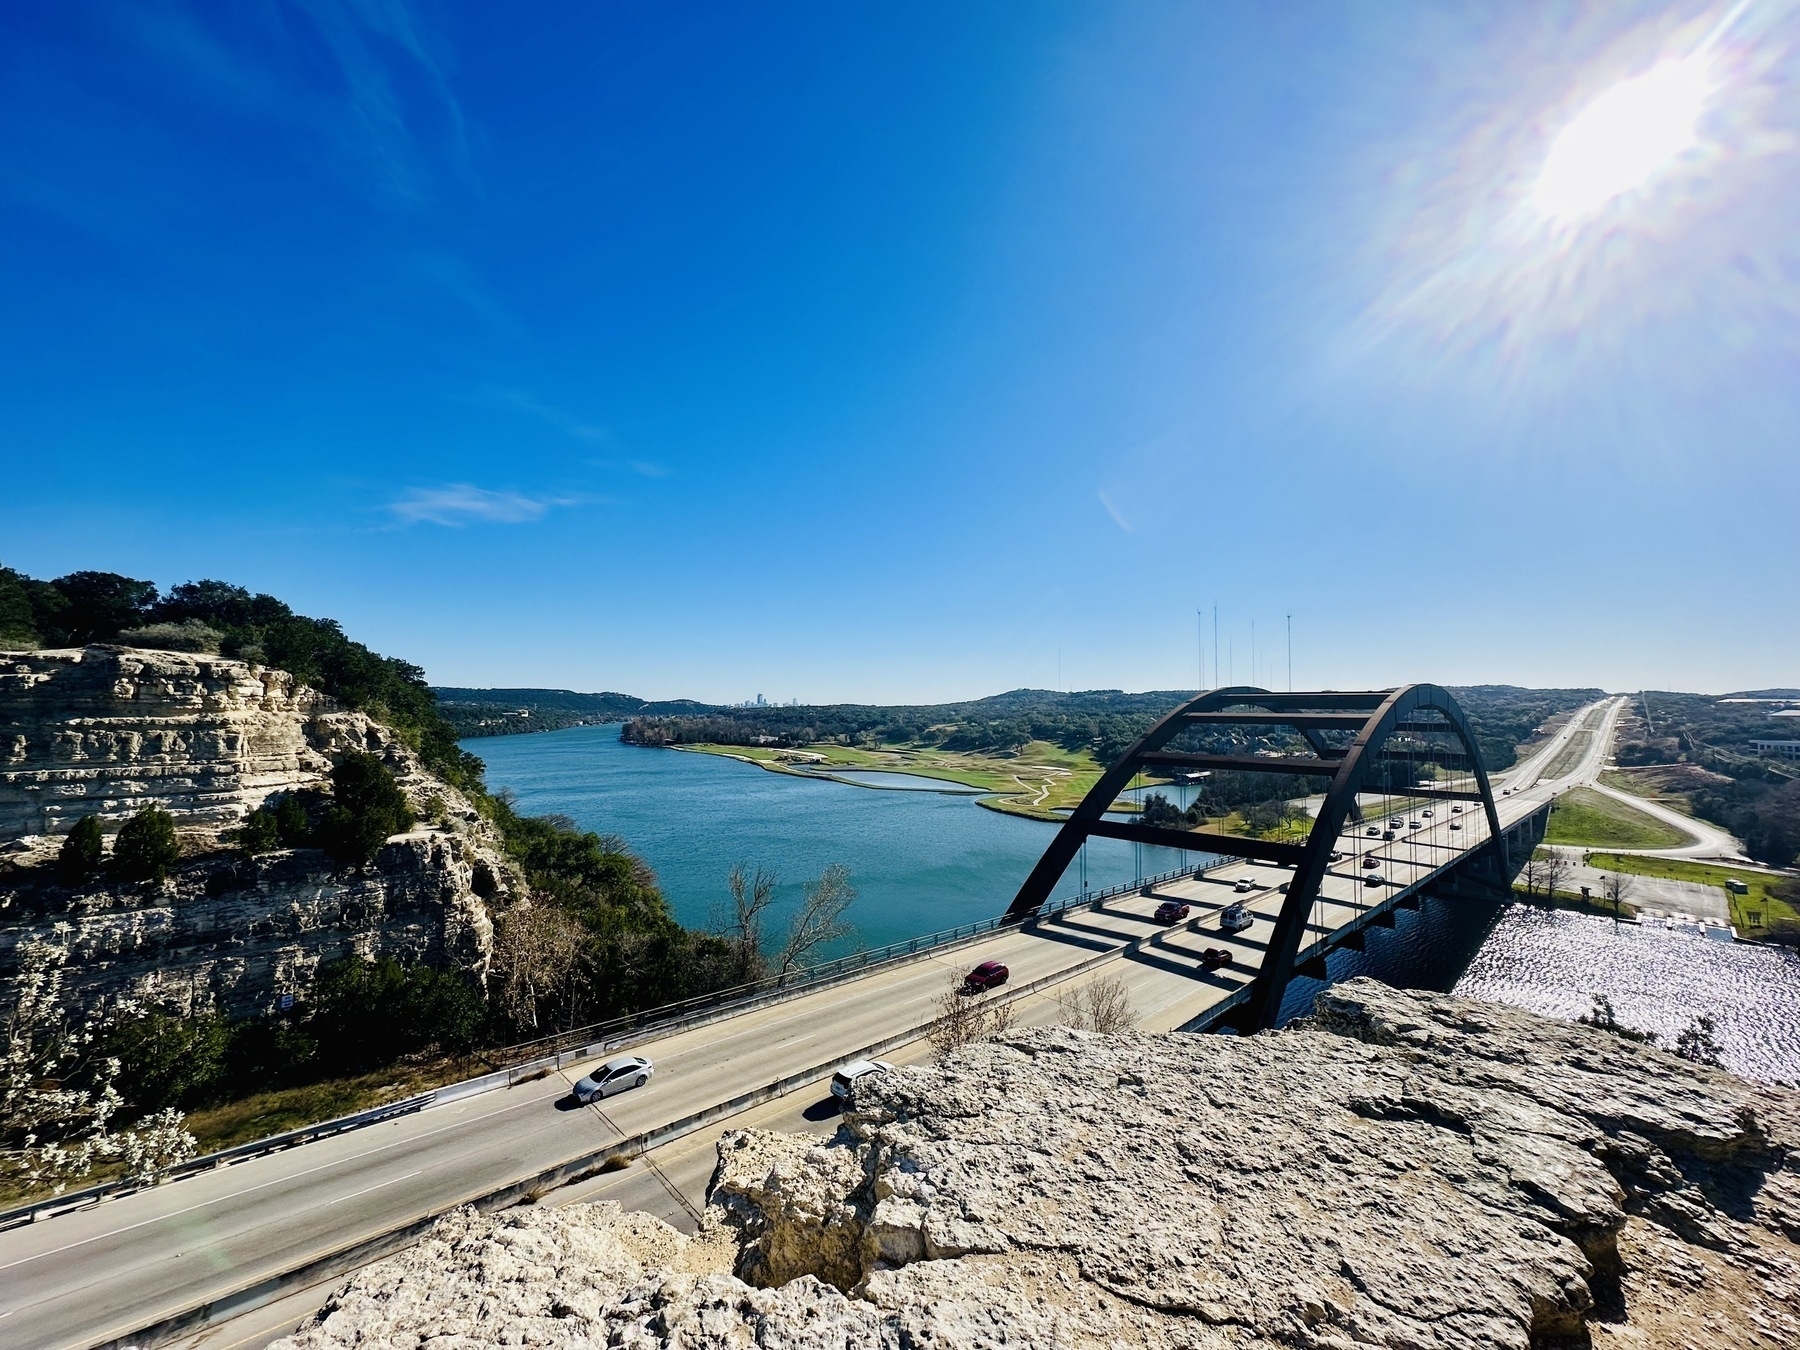 A view of the Pennybacker (360) Brdige from atop the surrounding bluff, looking out over the river and surrounds.